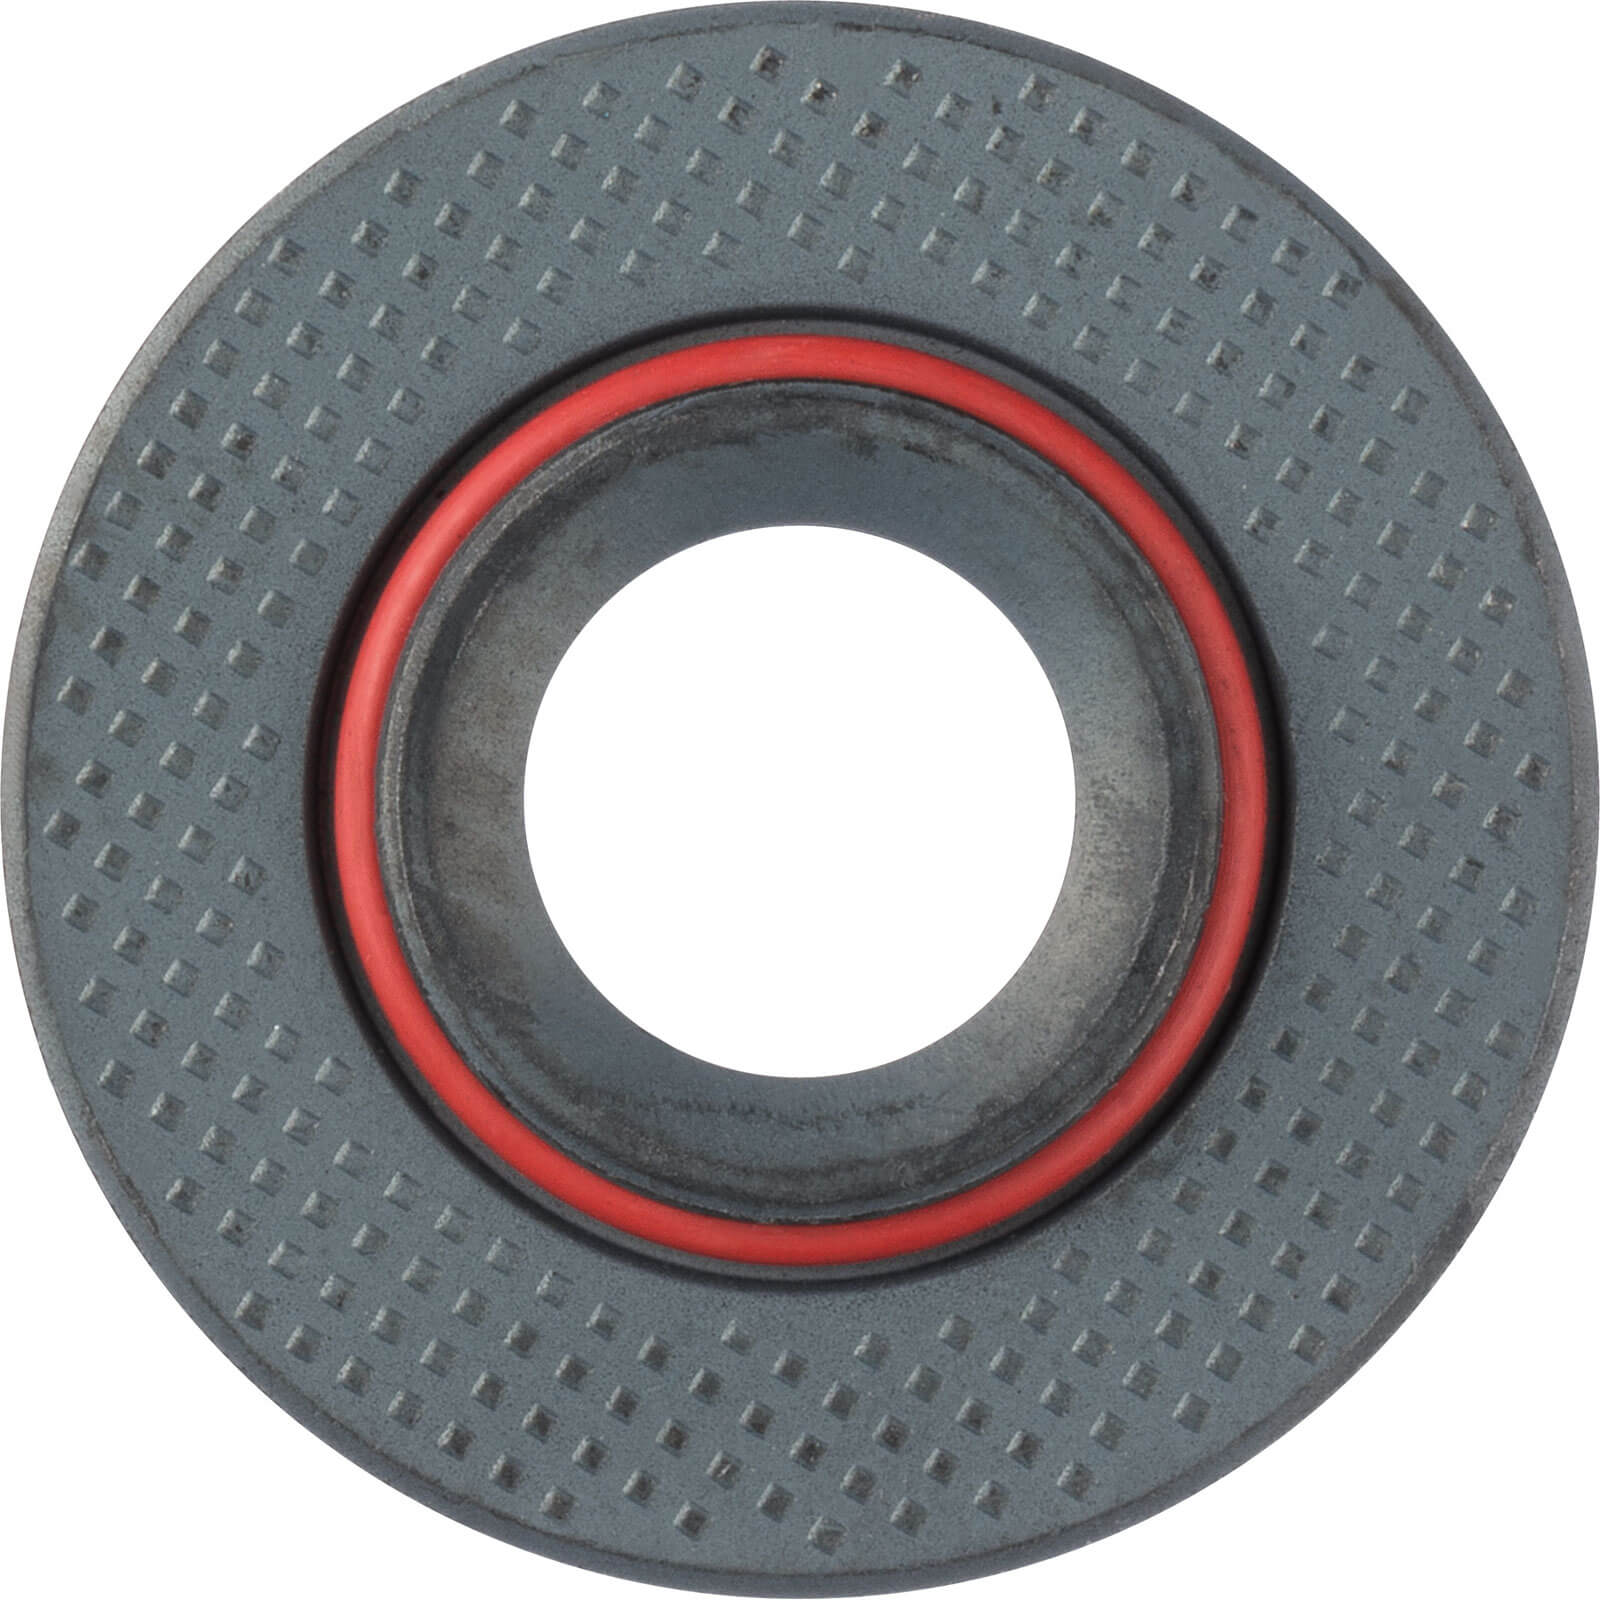 Photo of Bosch Backing Flange Nut For 115 - 230mm Angle Grinders